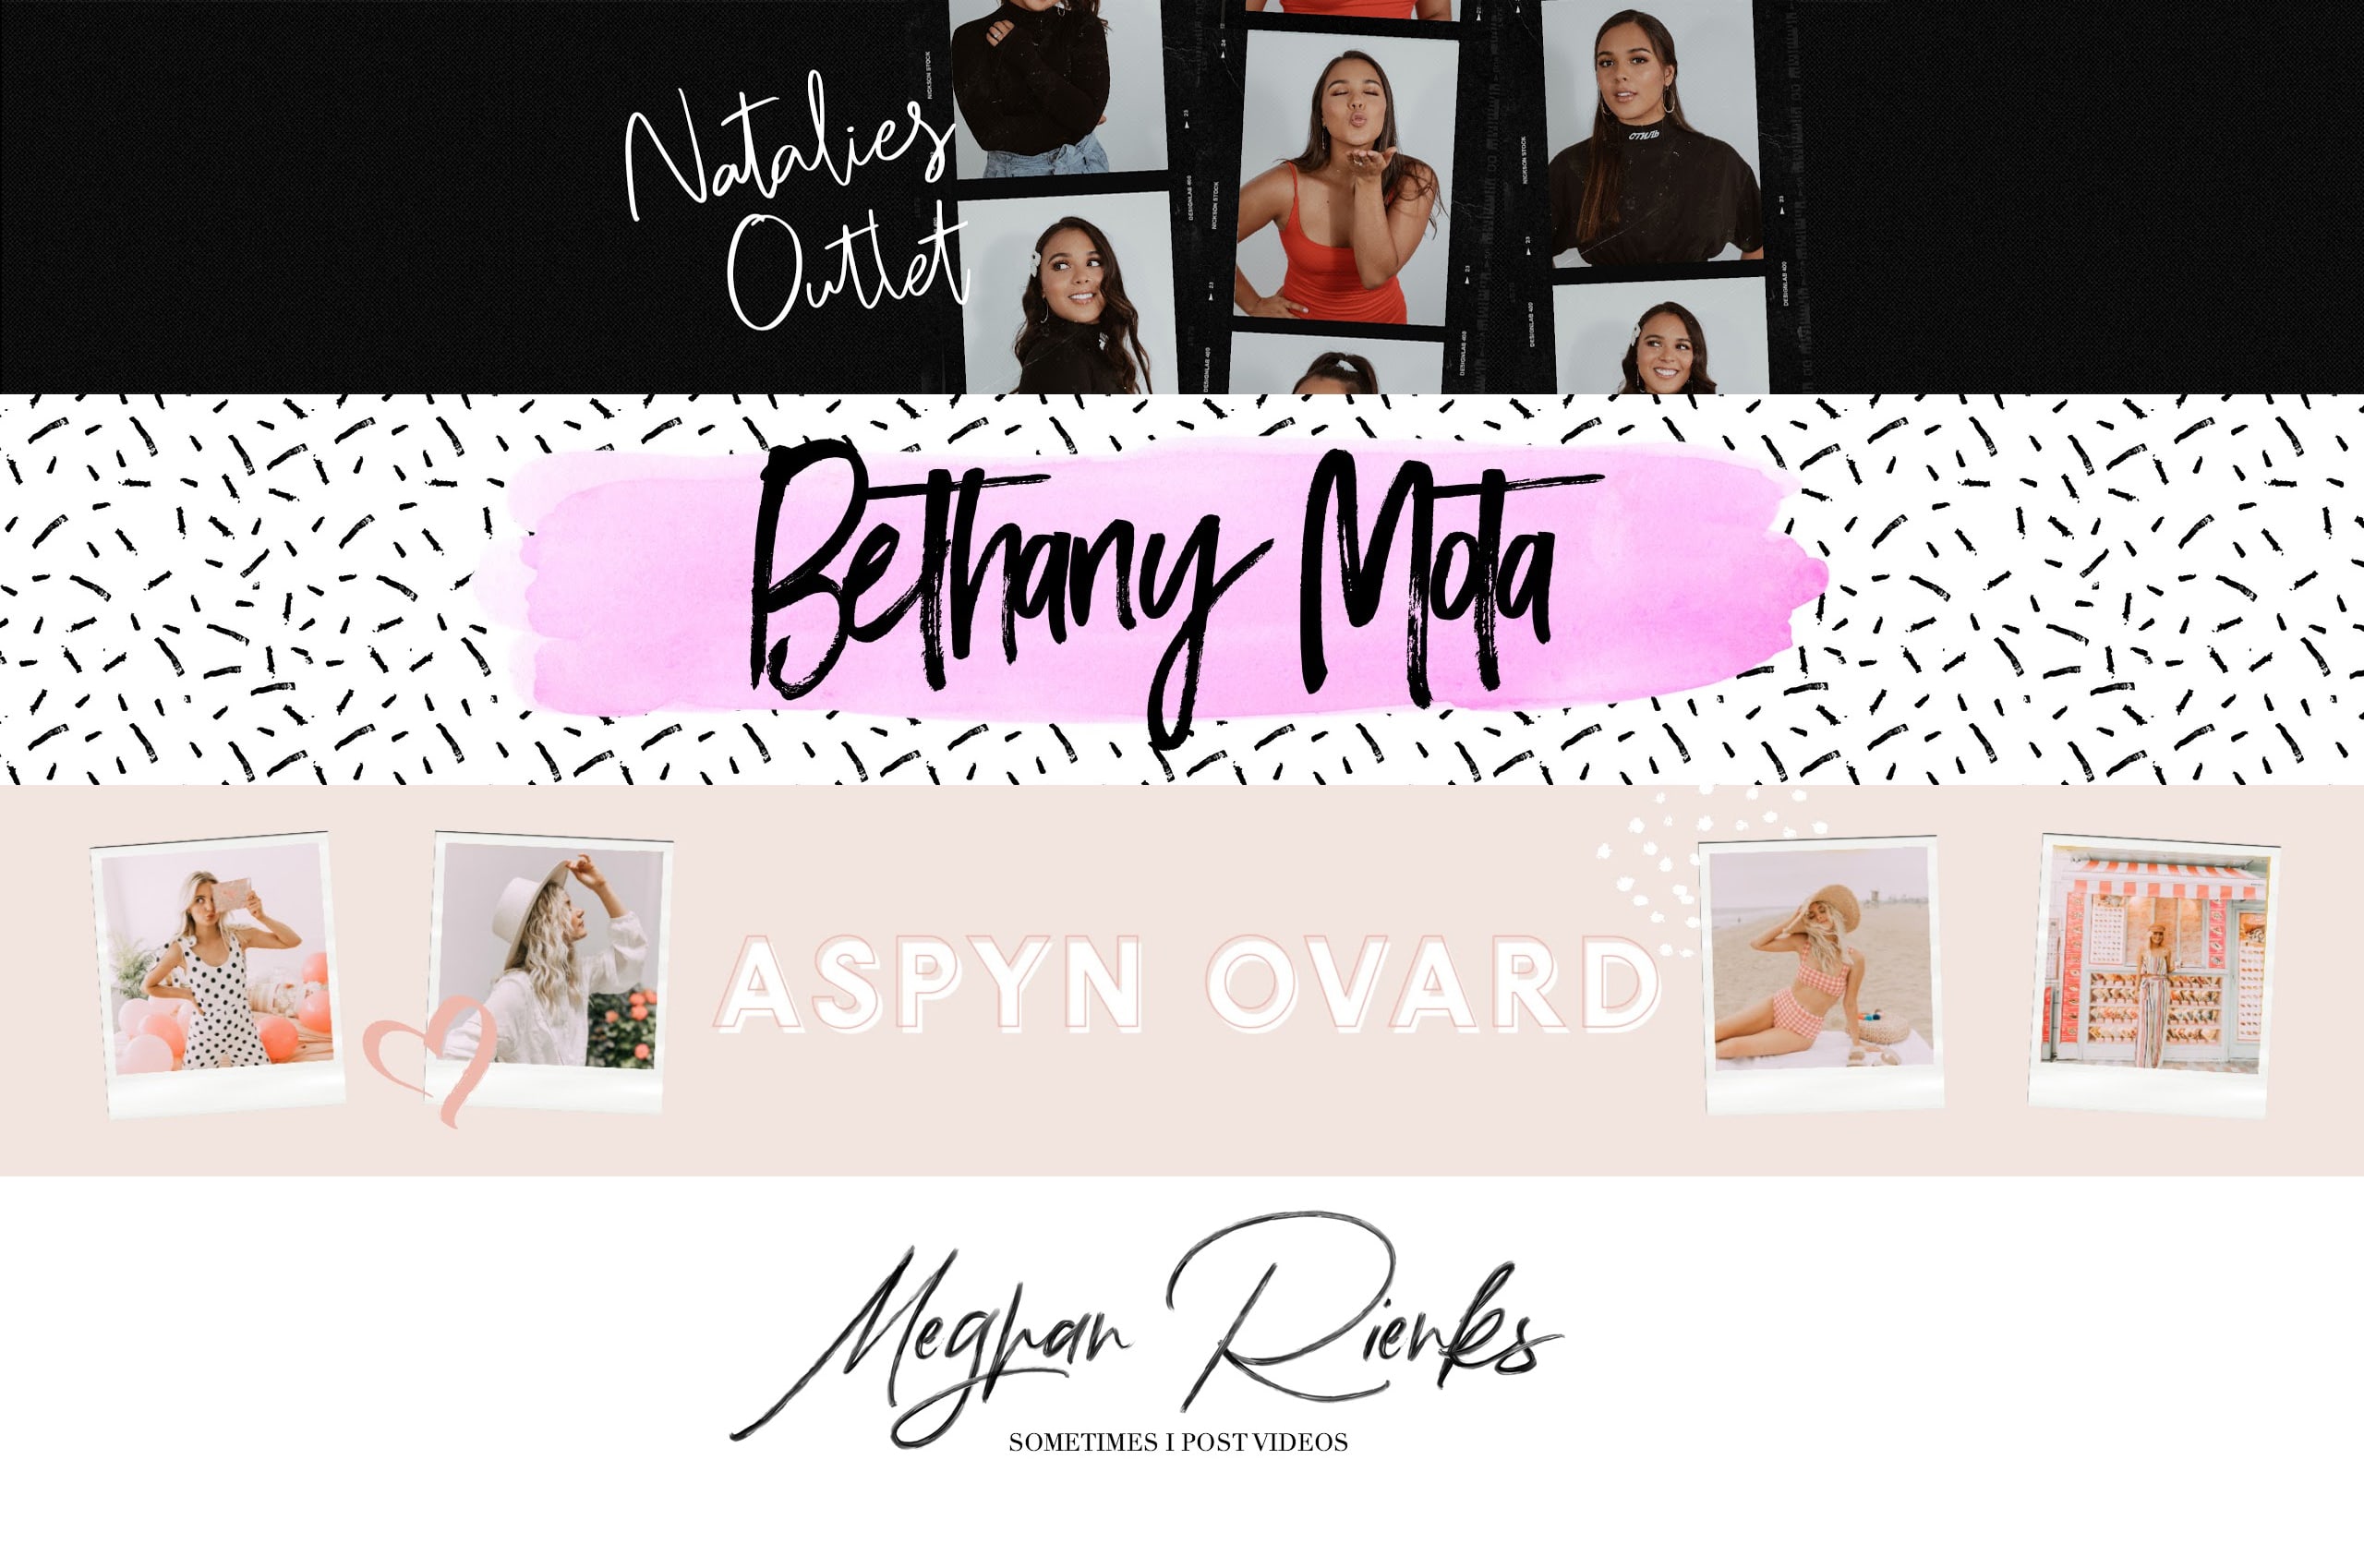 Design A Girly Trendy Youtube Channel Art Banner By Editinggforyou Fiverr